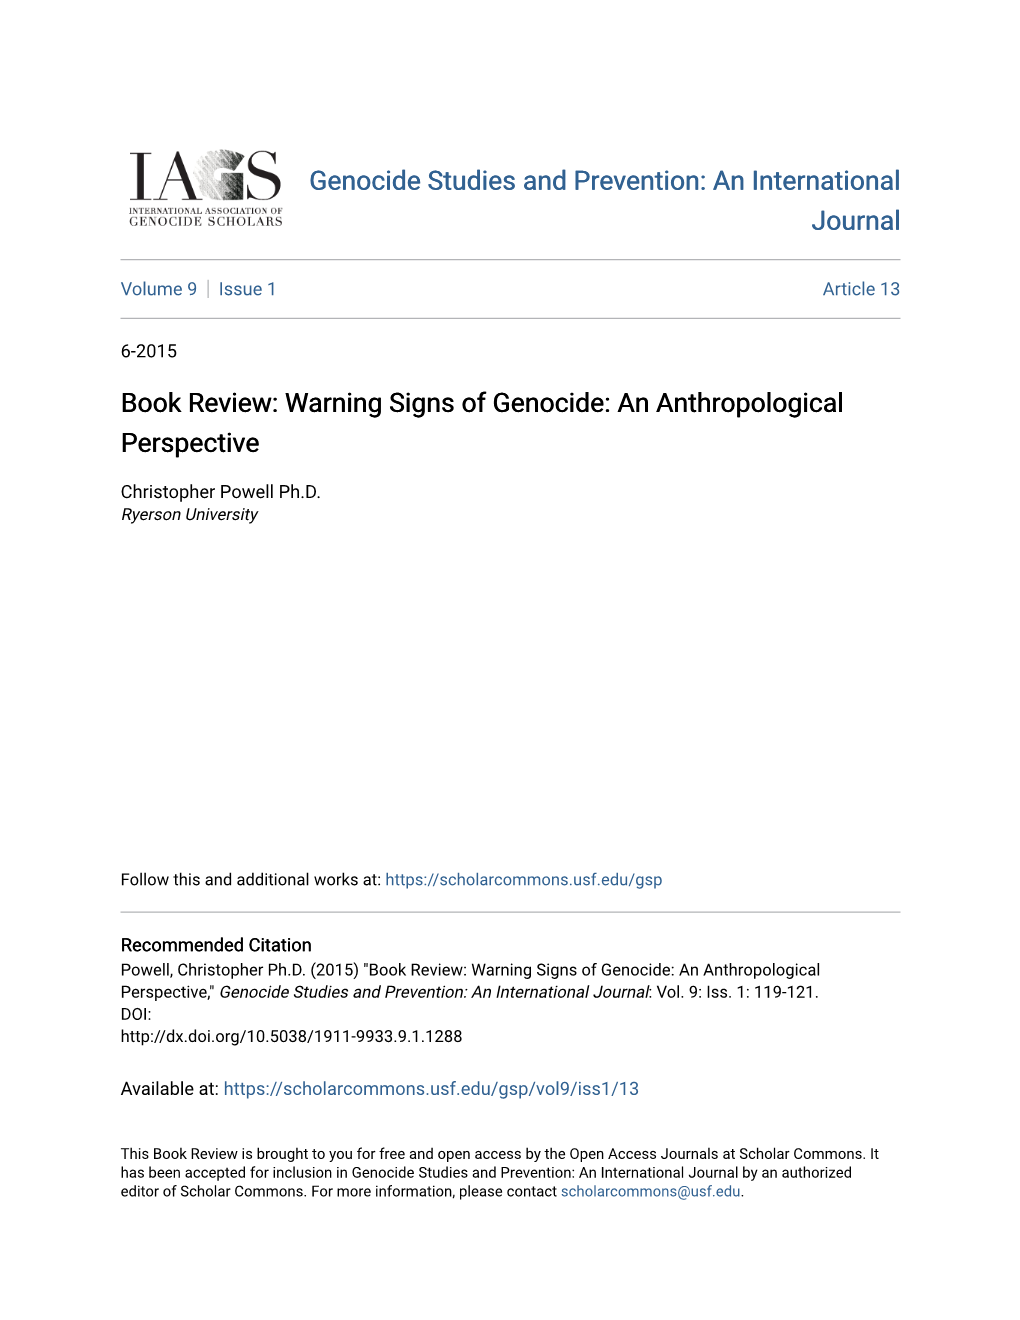 Warning Signs of Genocide: an Anthropological Perspective